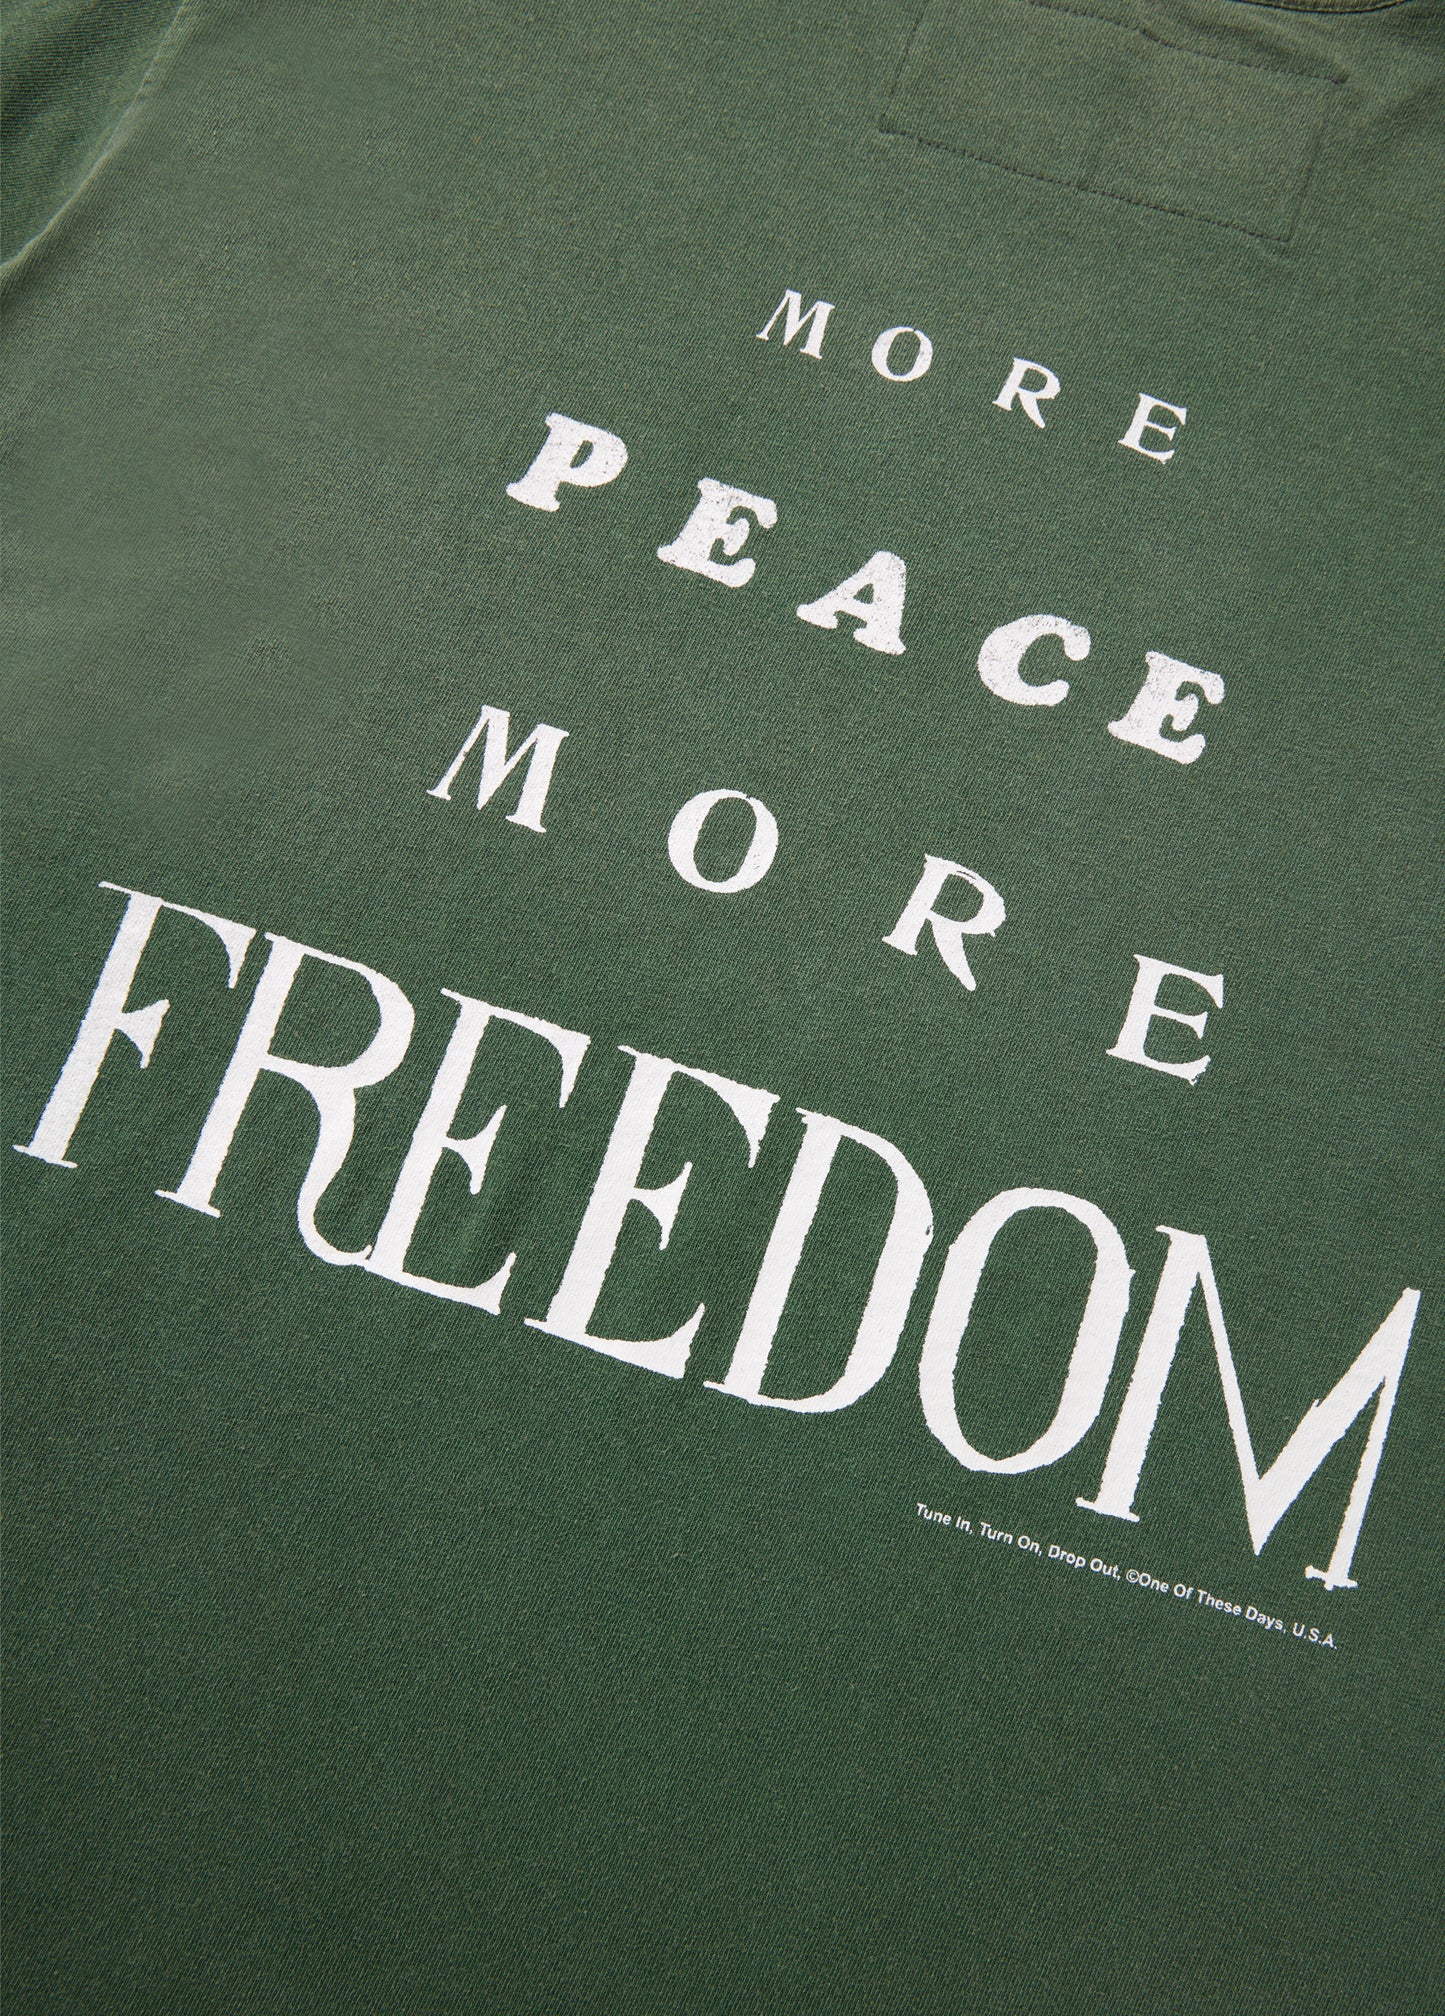 More Peace, More Freedom Tee | Washed Forest Green